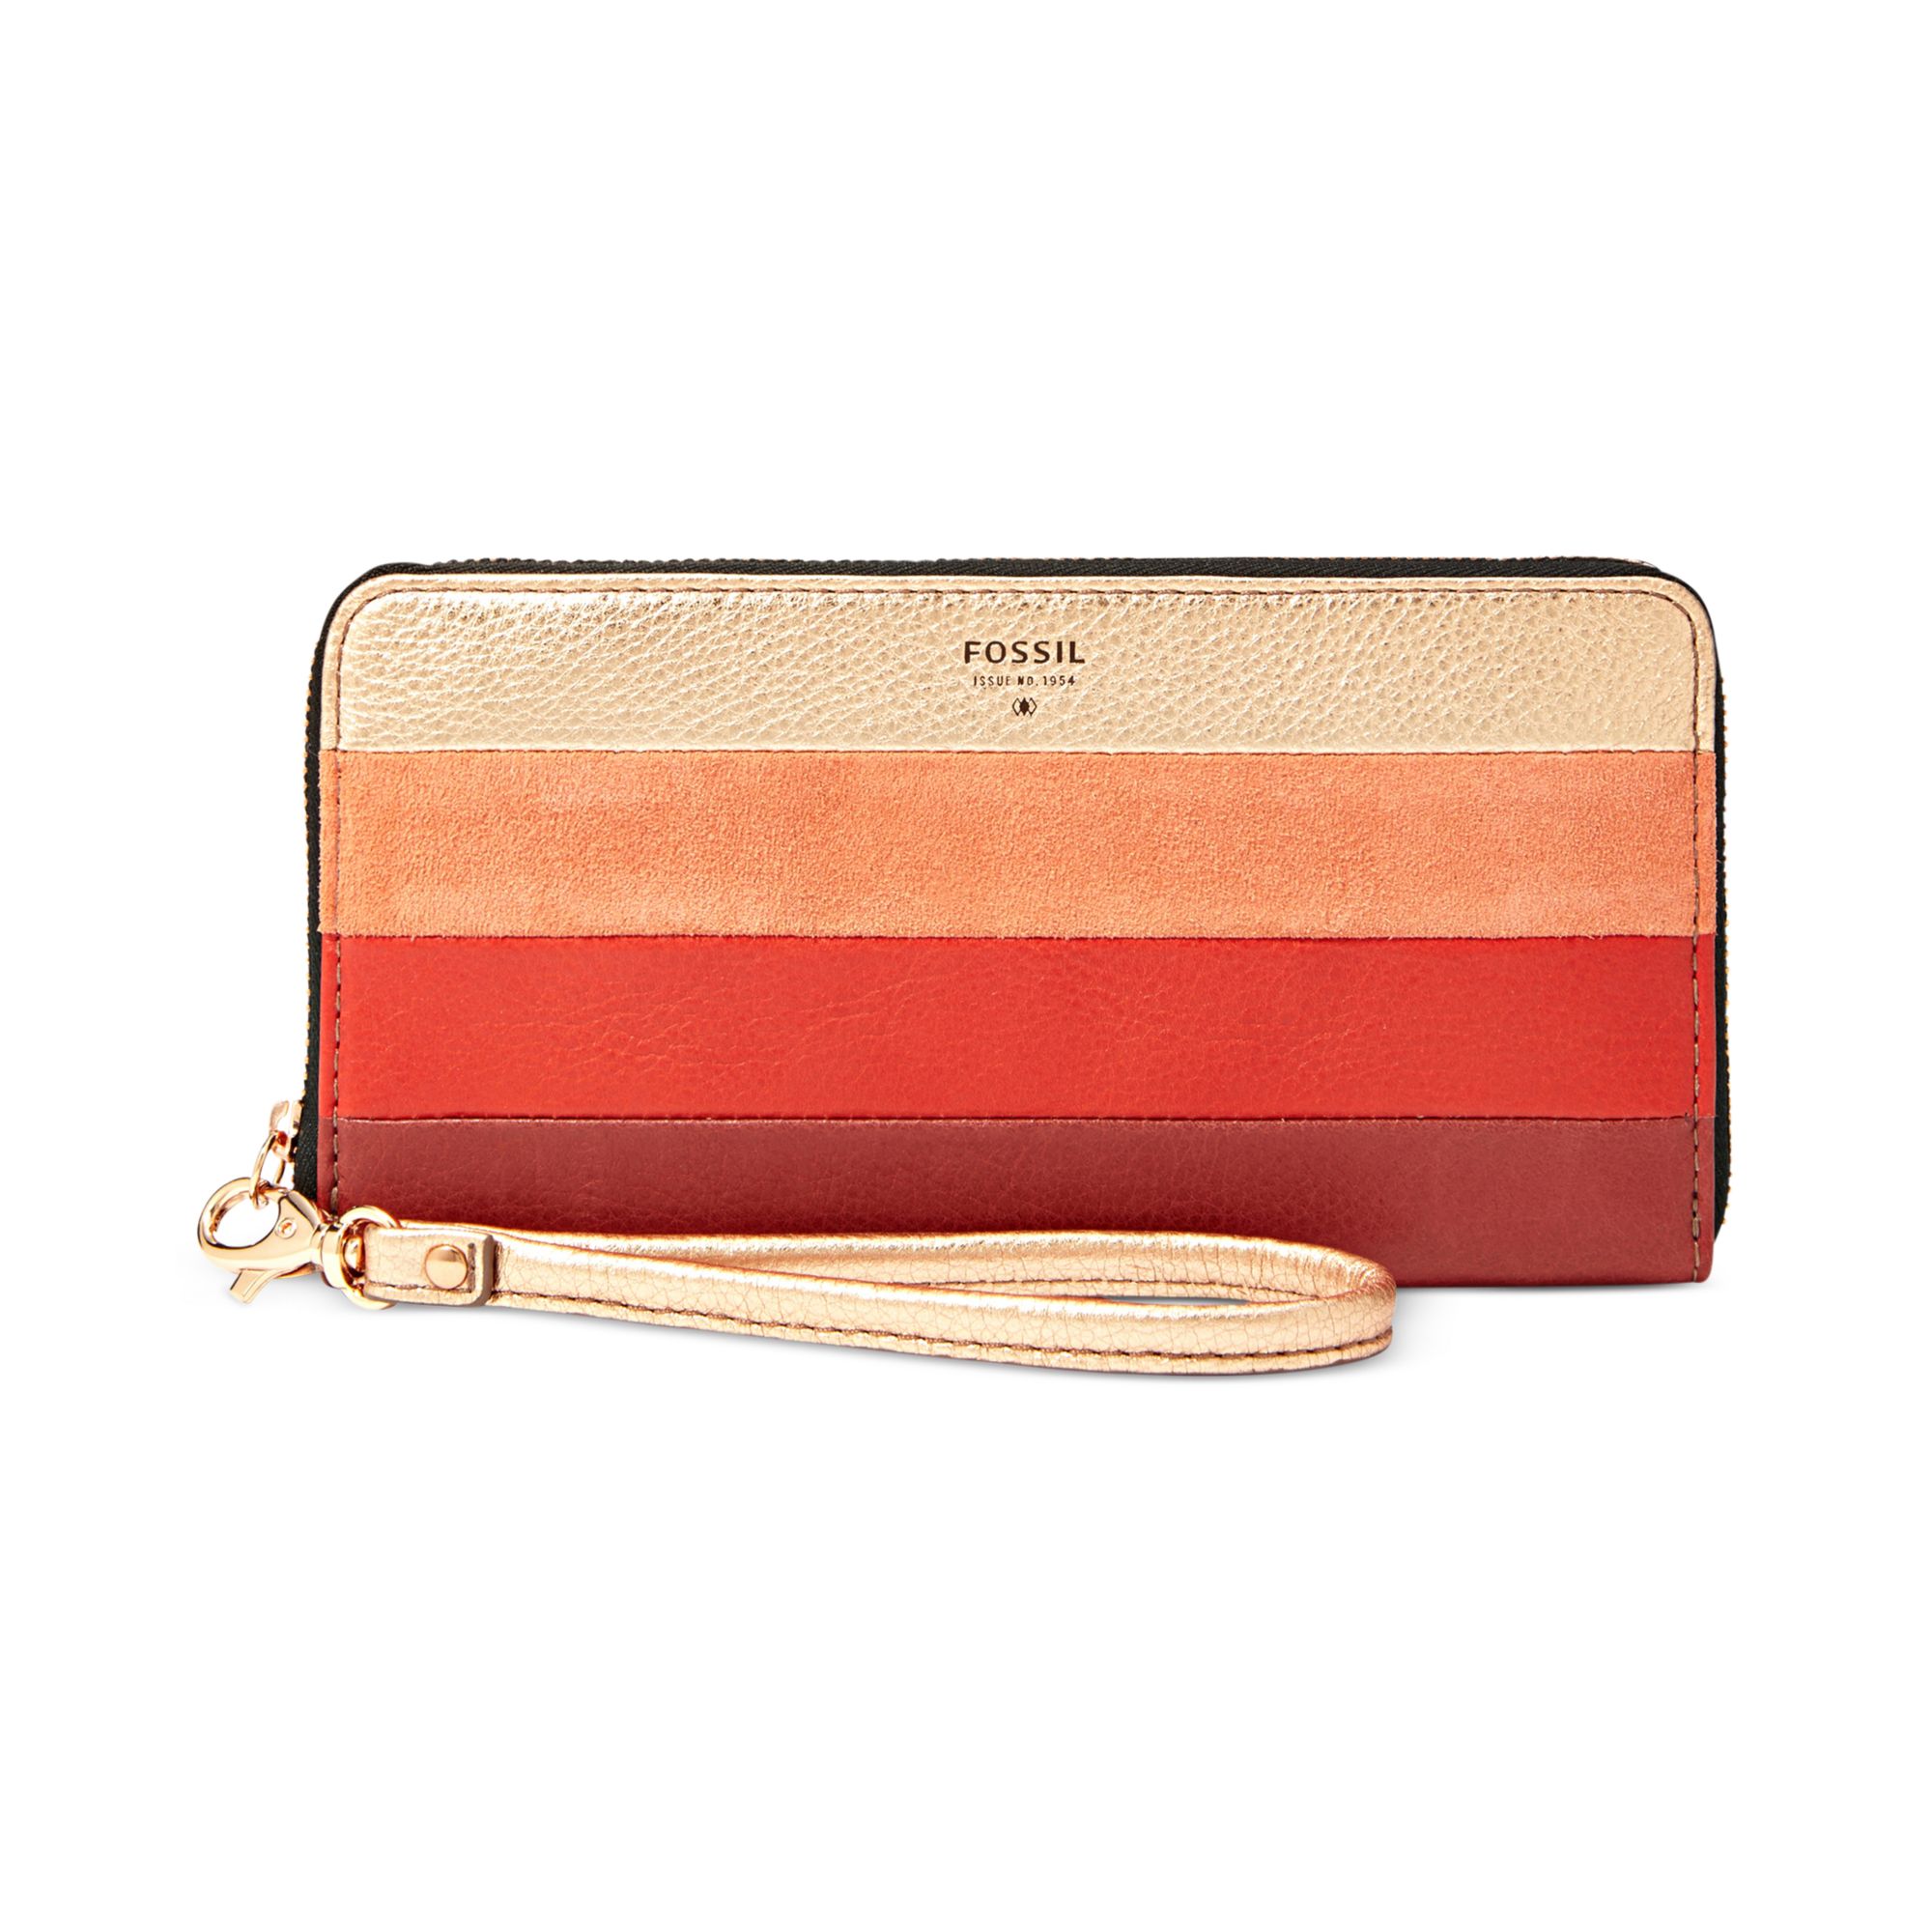 Fossil Leather Patchwork Zip Clutch Wallet in Red (RED MULTI) | Lyst